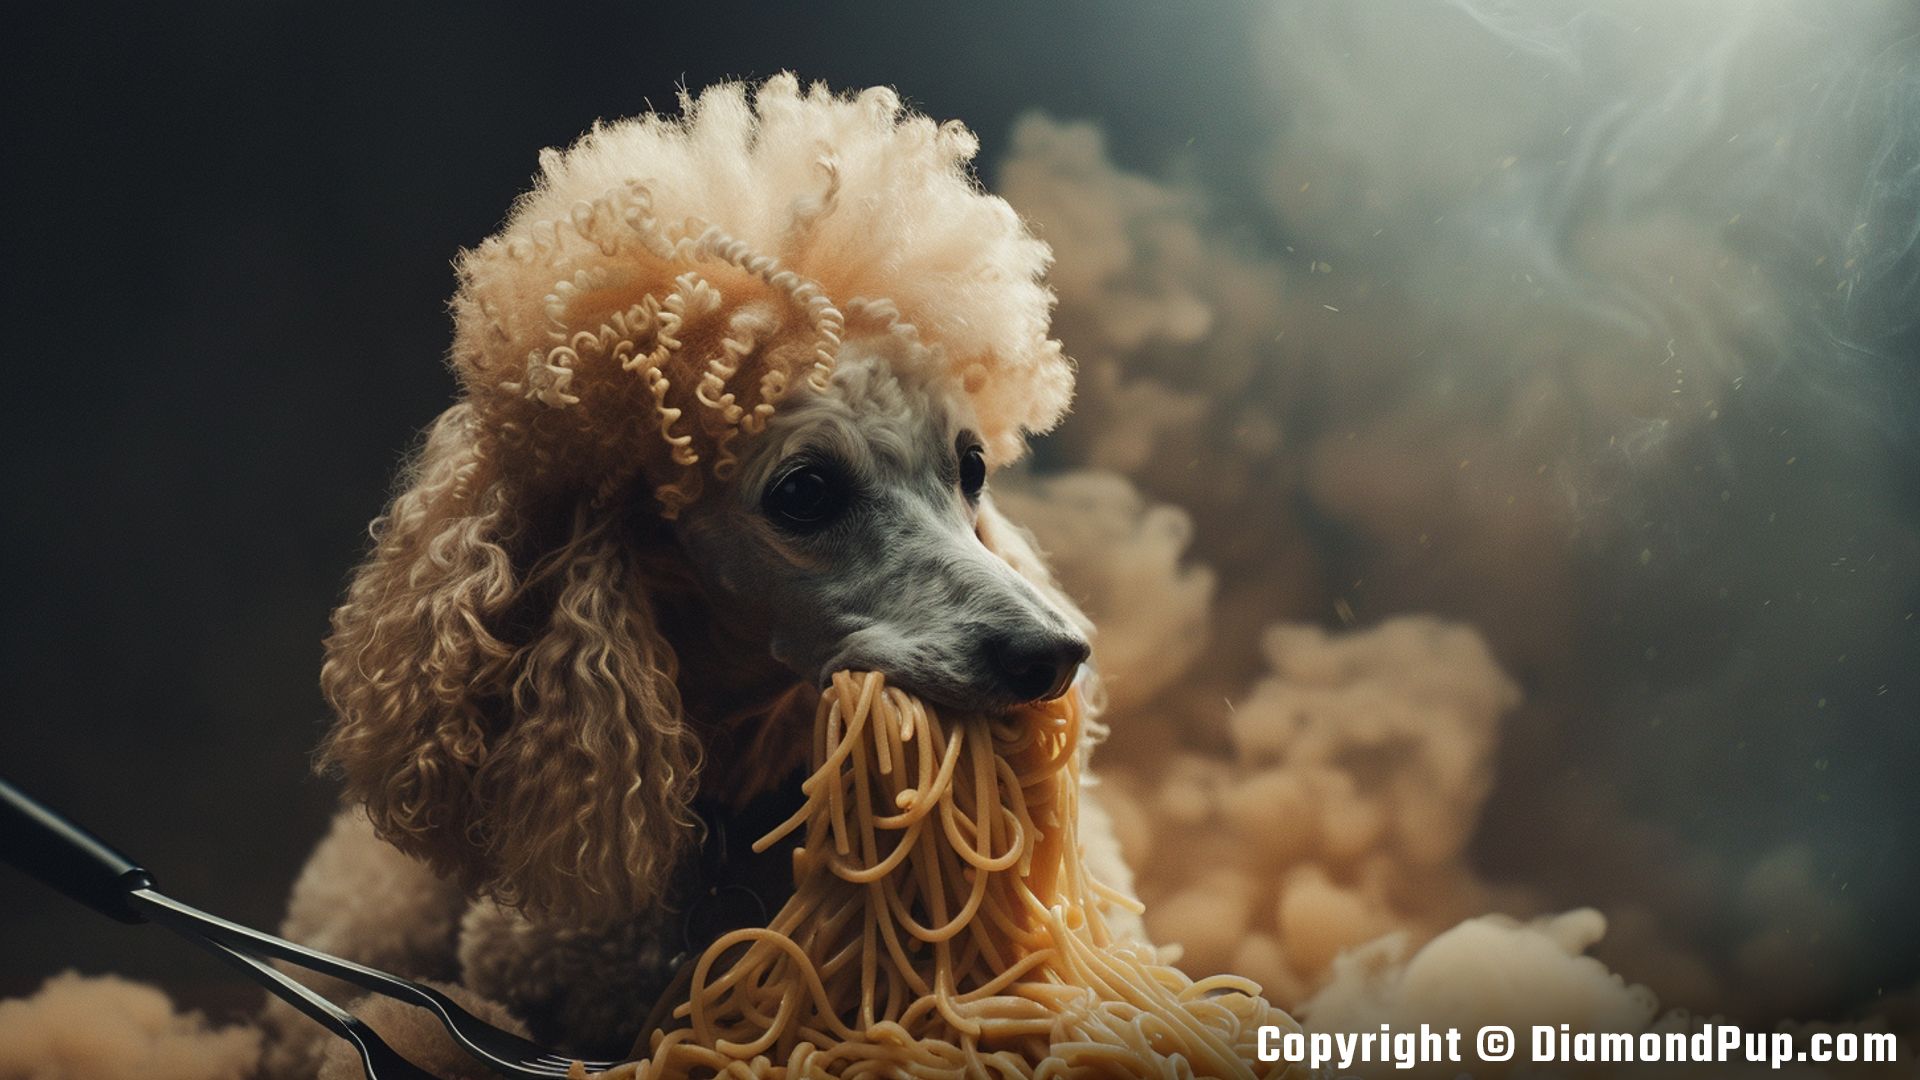 Photograph of a Cute Poodle Eating Pasta